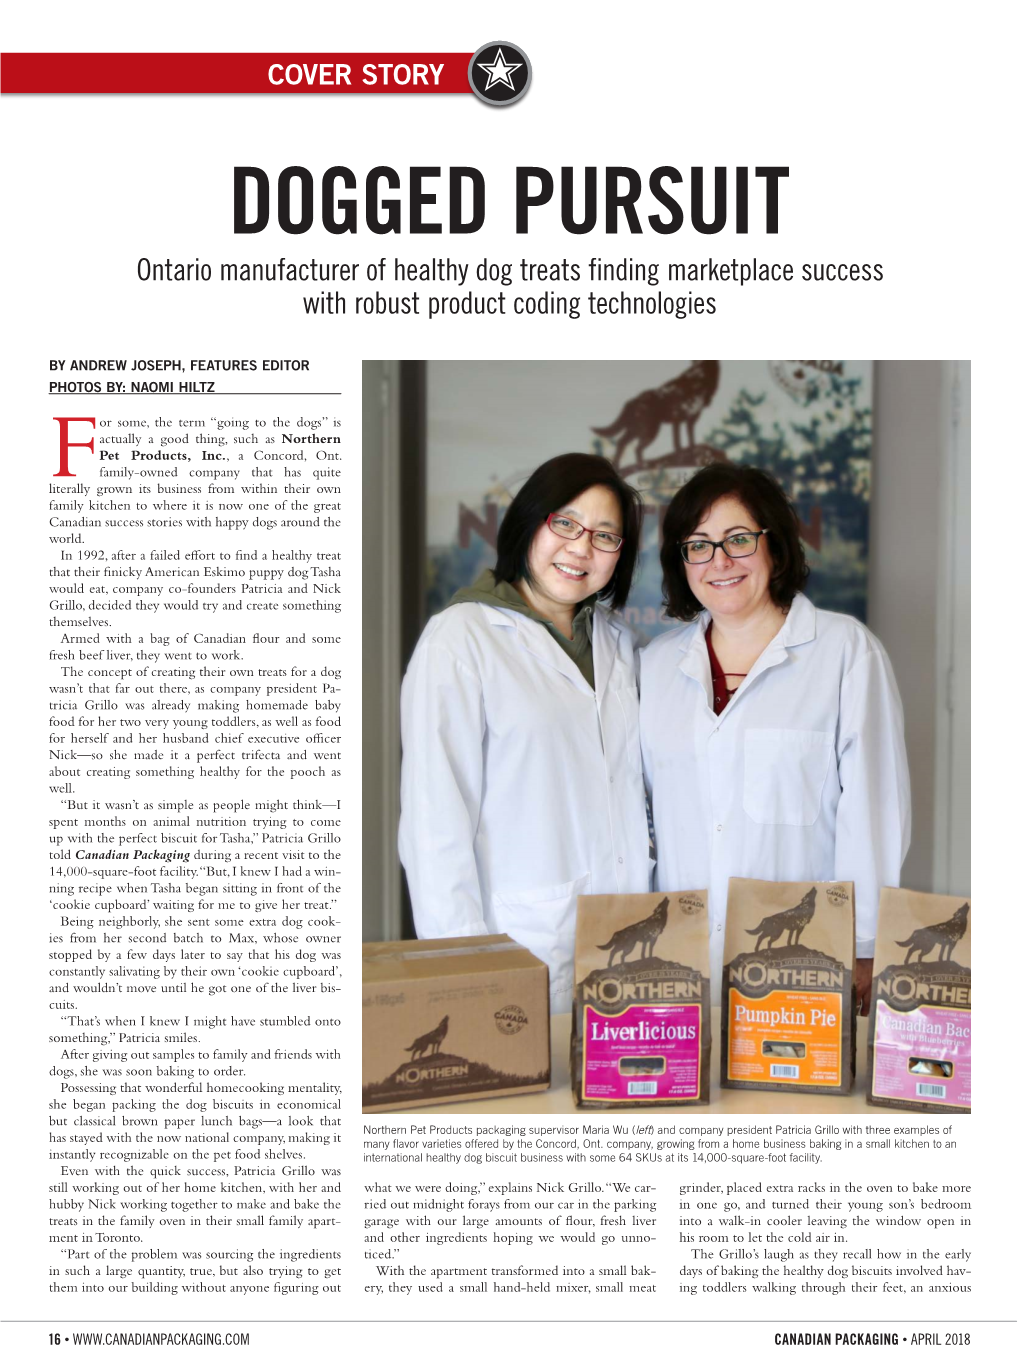 Ontario Manufacturer of Healthy Dog Treats Finding Marketplace Success with Robust Product Coding Technologies